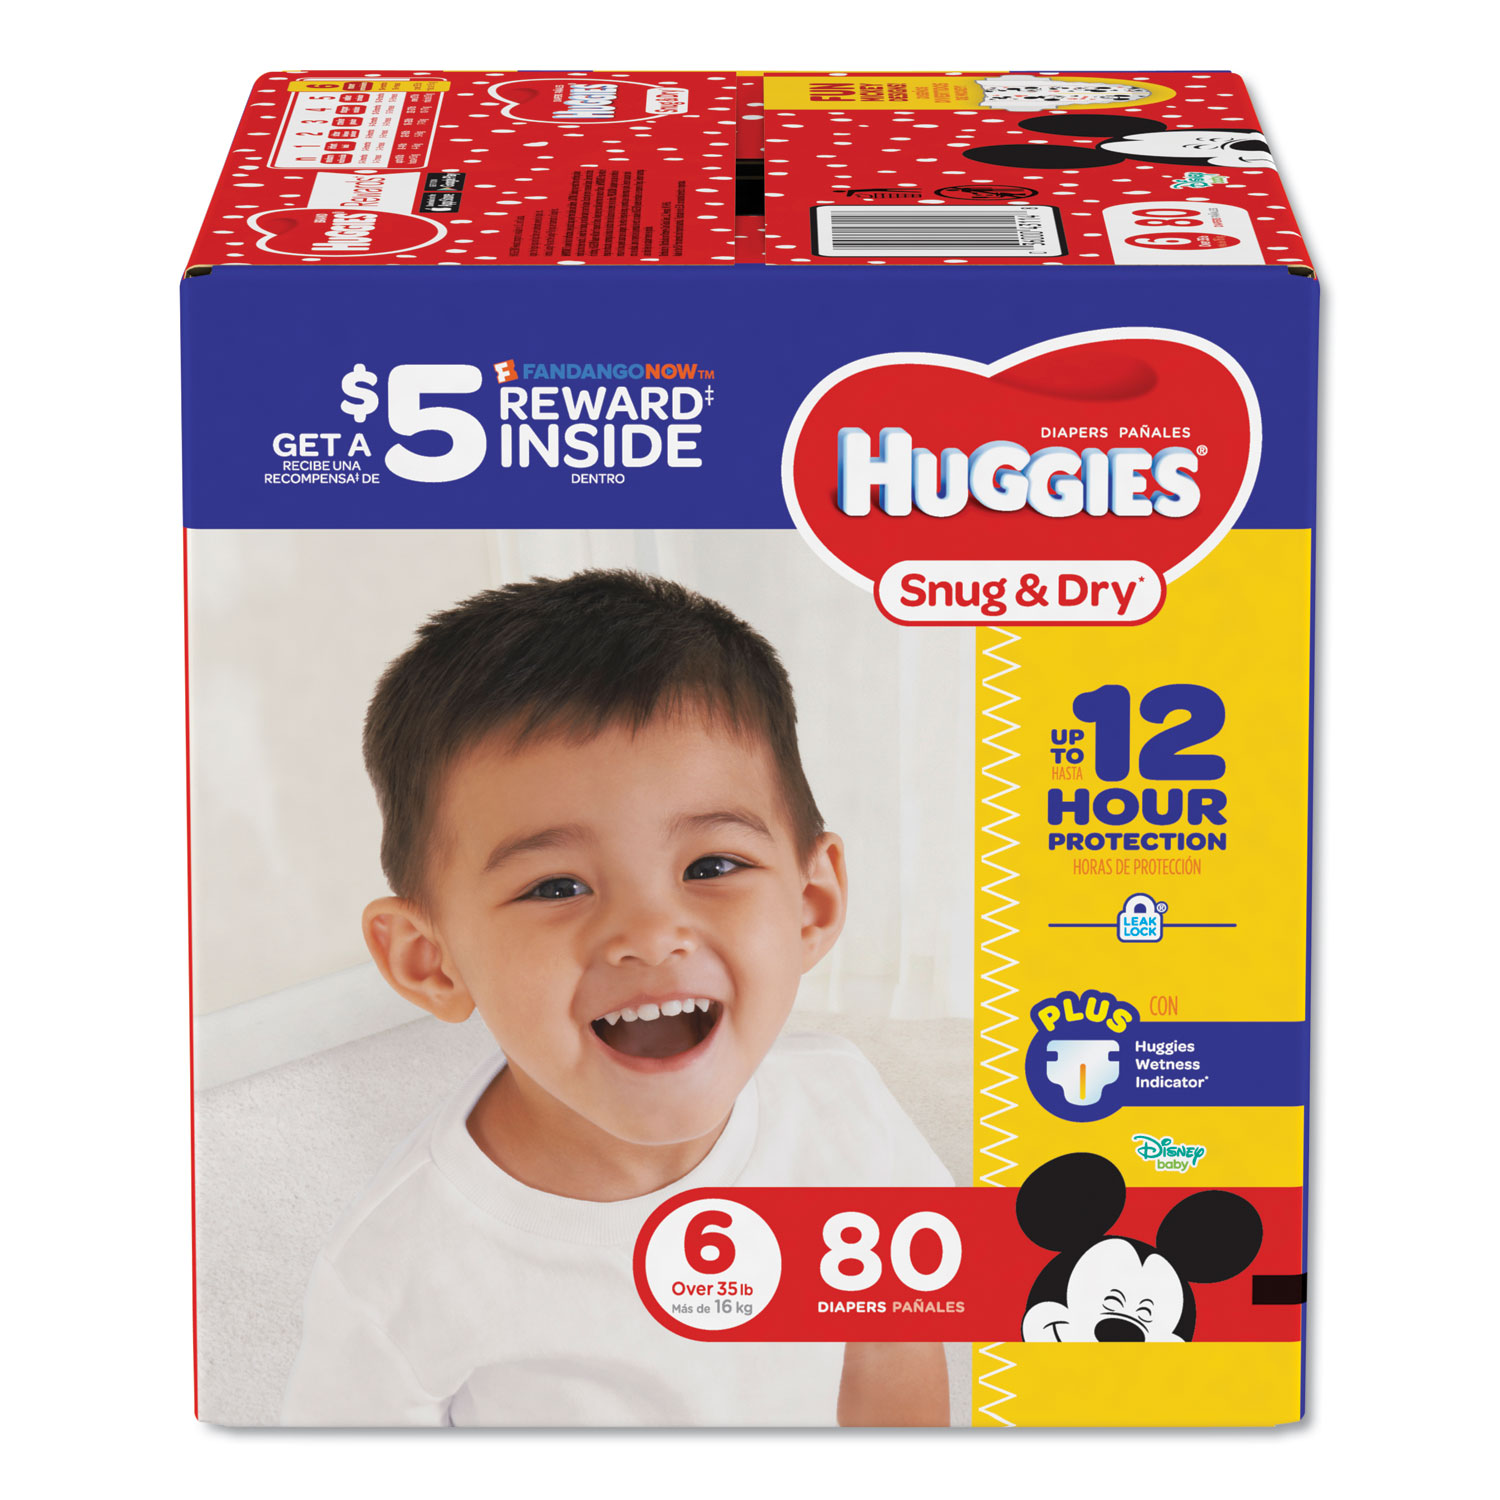  Huggies 43114 Snug and Dry Diapers, Size 6, 35 lbs min, 80/Pack (KCC43114) 